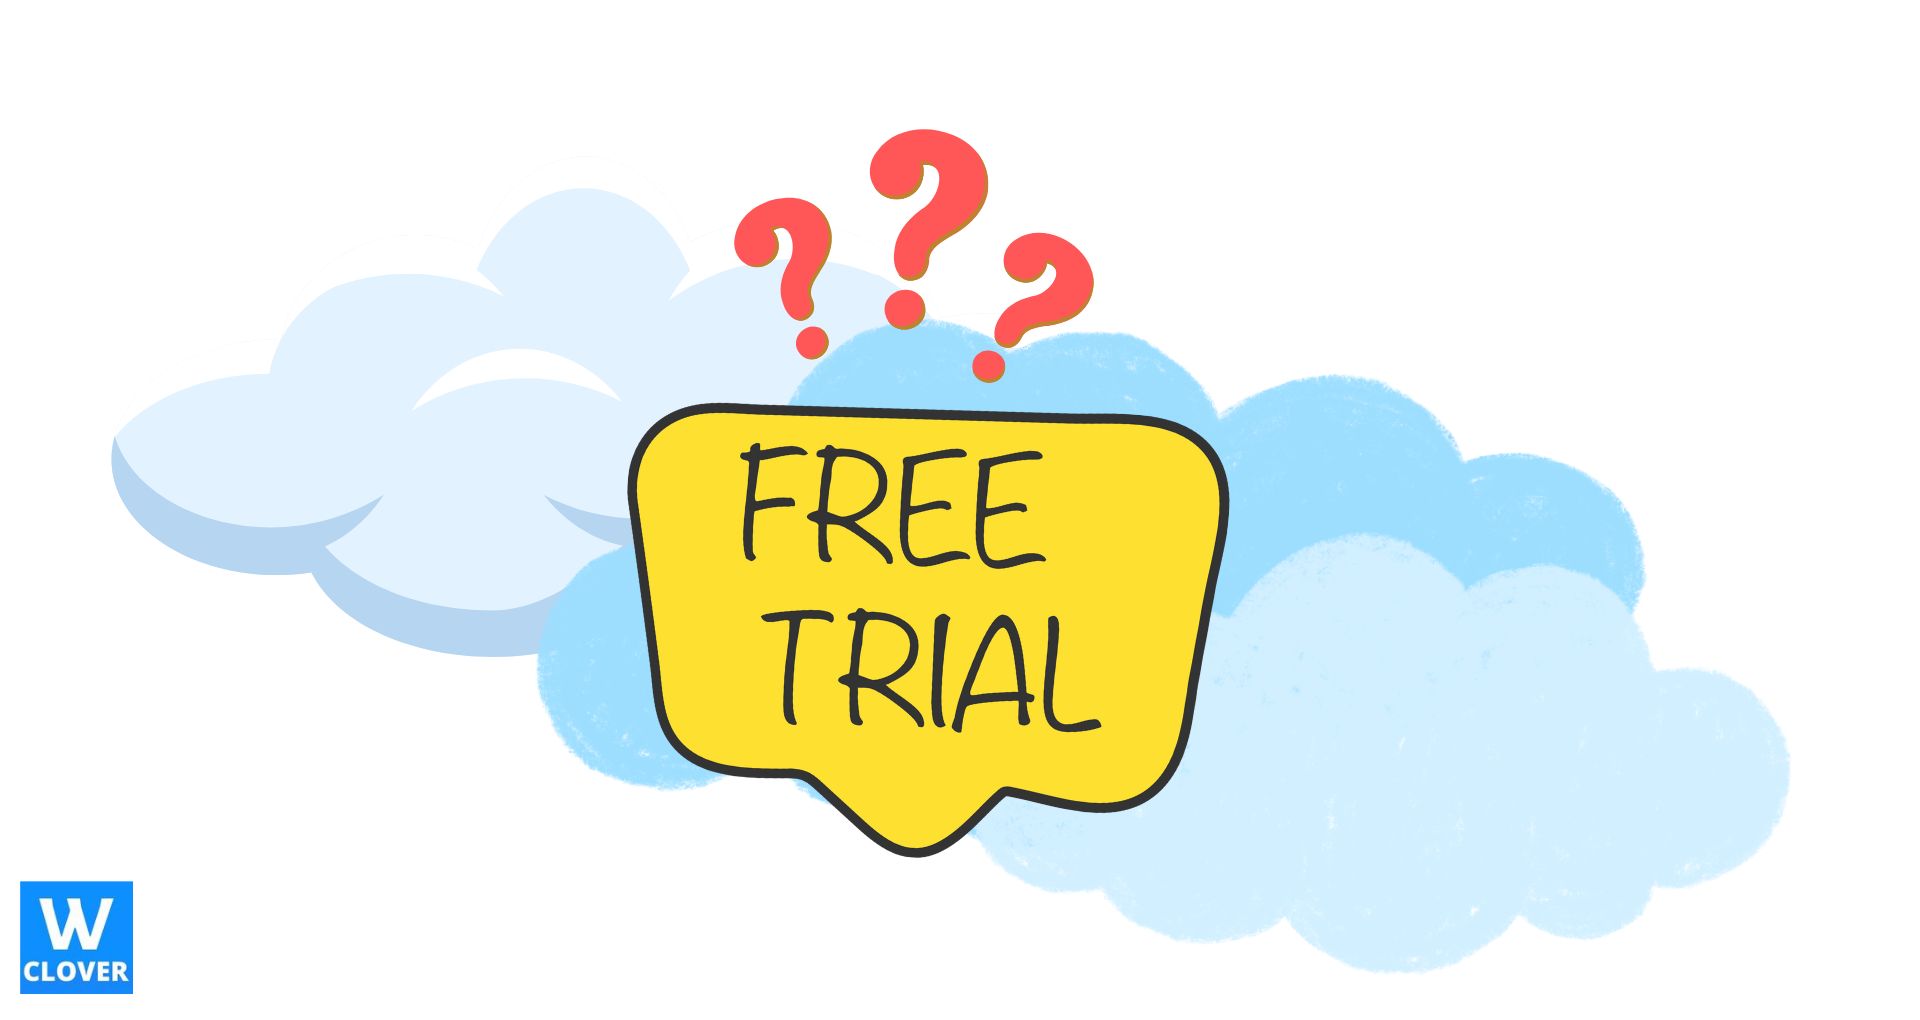 samcart vs thrivecart-infographics of free trial,on yellow sign with blue clouds and red question marks.